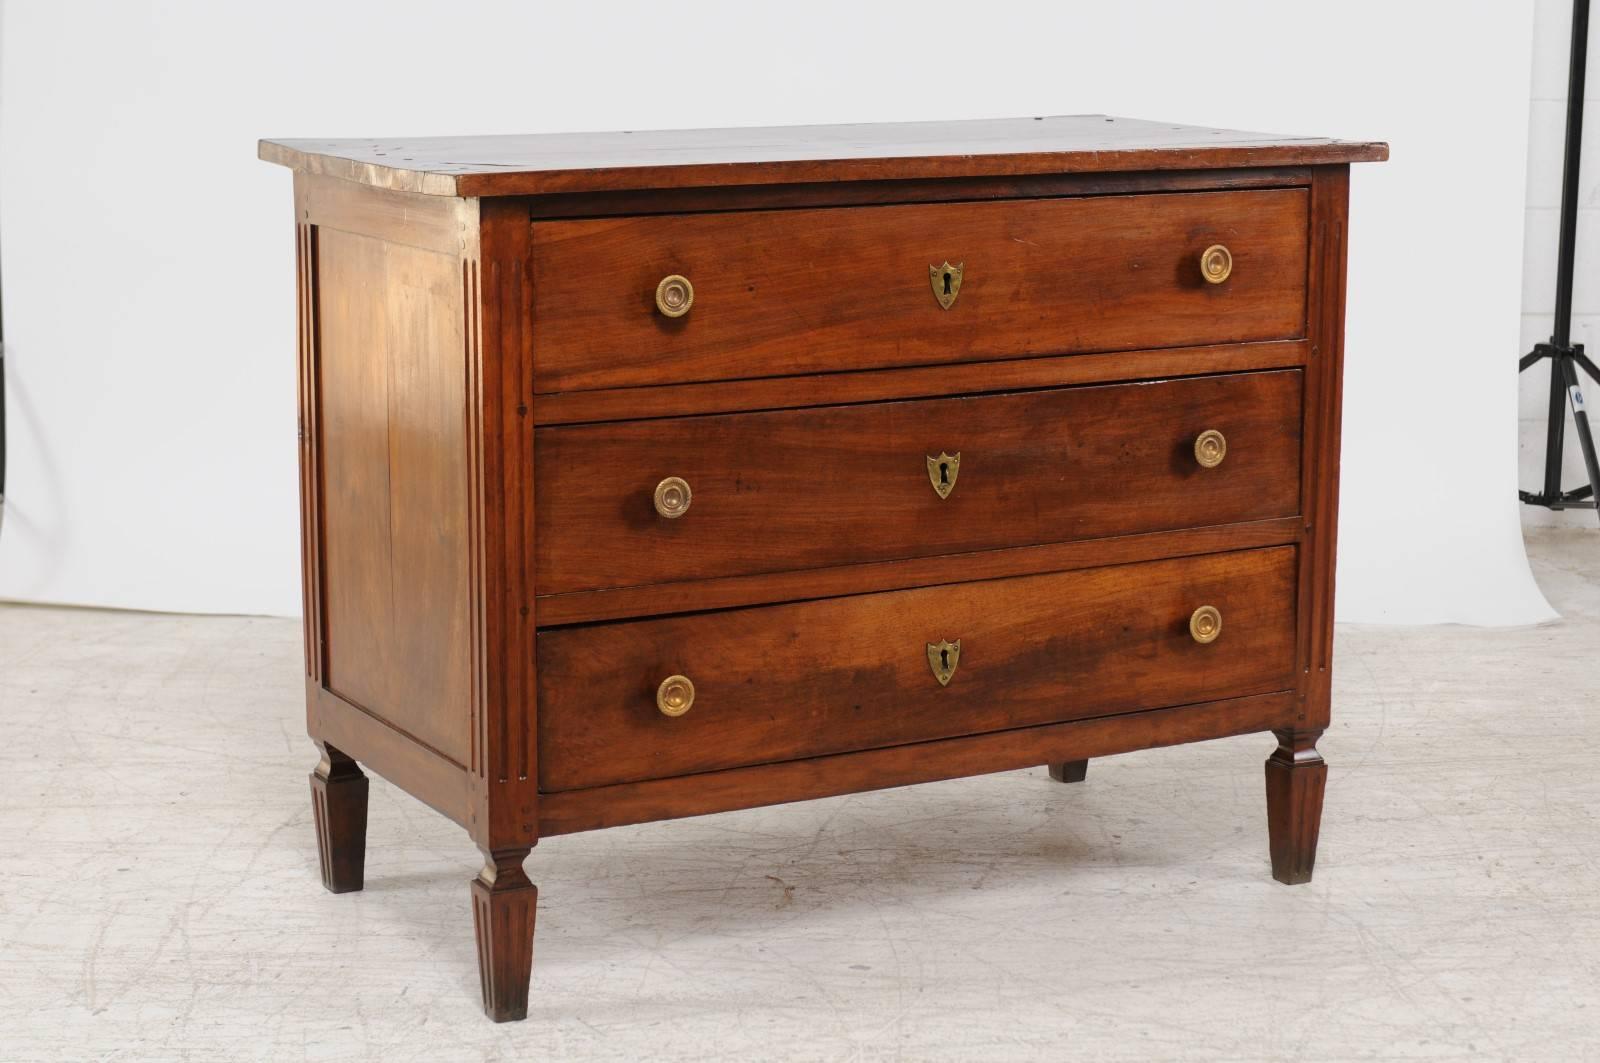 19th Century Italian 1820s Neoclassical Walnut Three-Drawer Commode with Fluted Tapered Feet